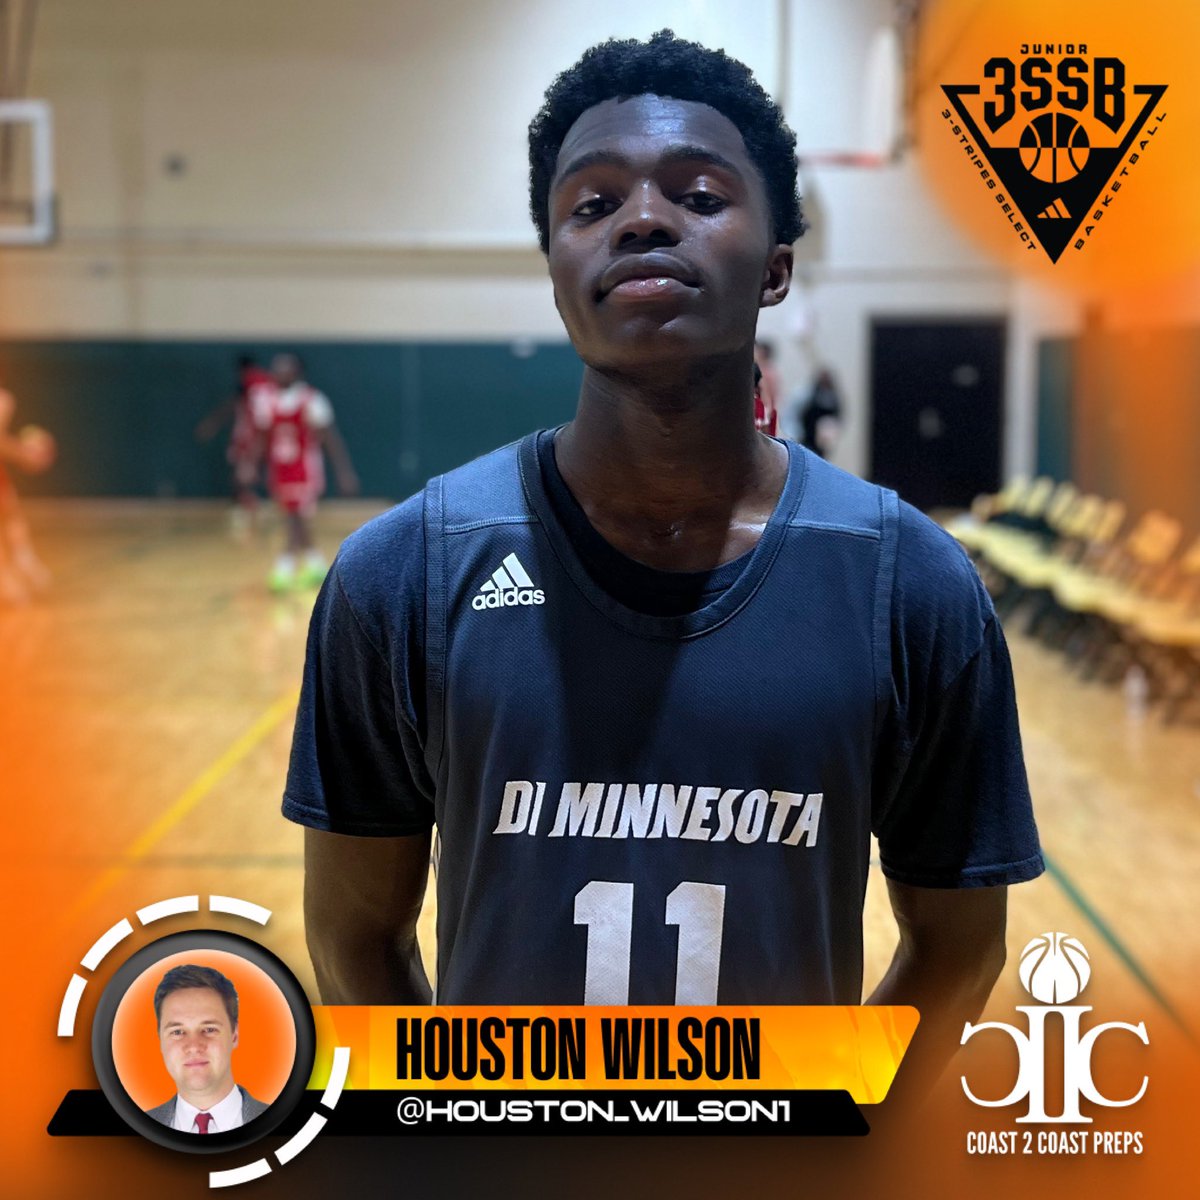 D1 Minnesota marches on to the 14U @Jr3SSB Birmingham semifinals thanks to the help from 6’3” Emmanuel Oyesanmi. One of his teams go to scorers and also one of the top defenders on his team. Can guard multiple positions. @Coast2CoastPrep